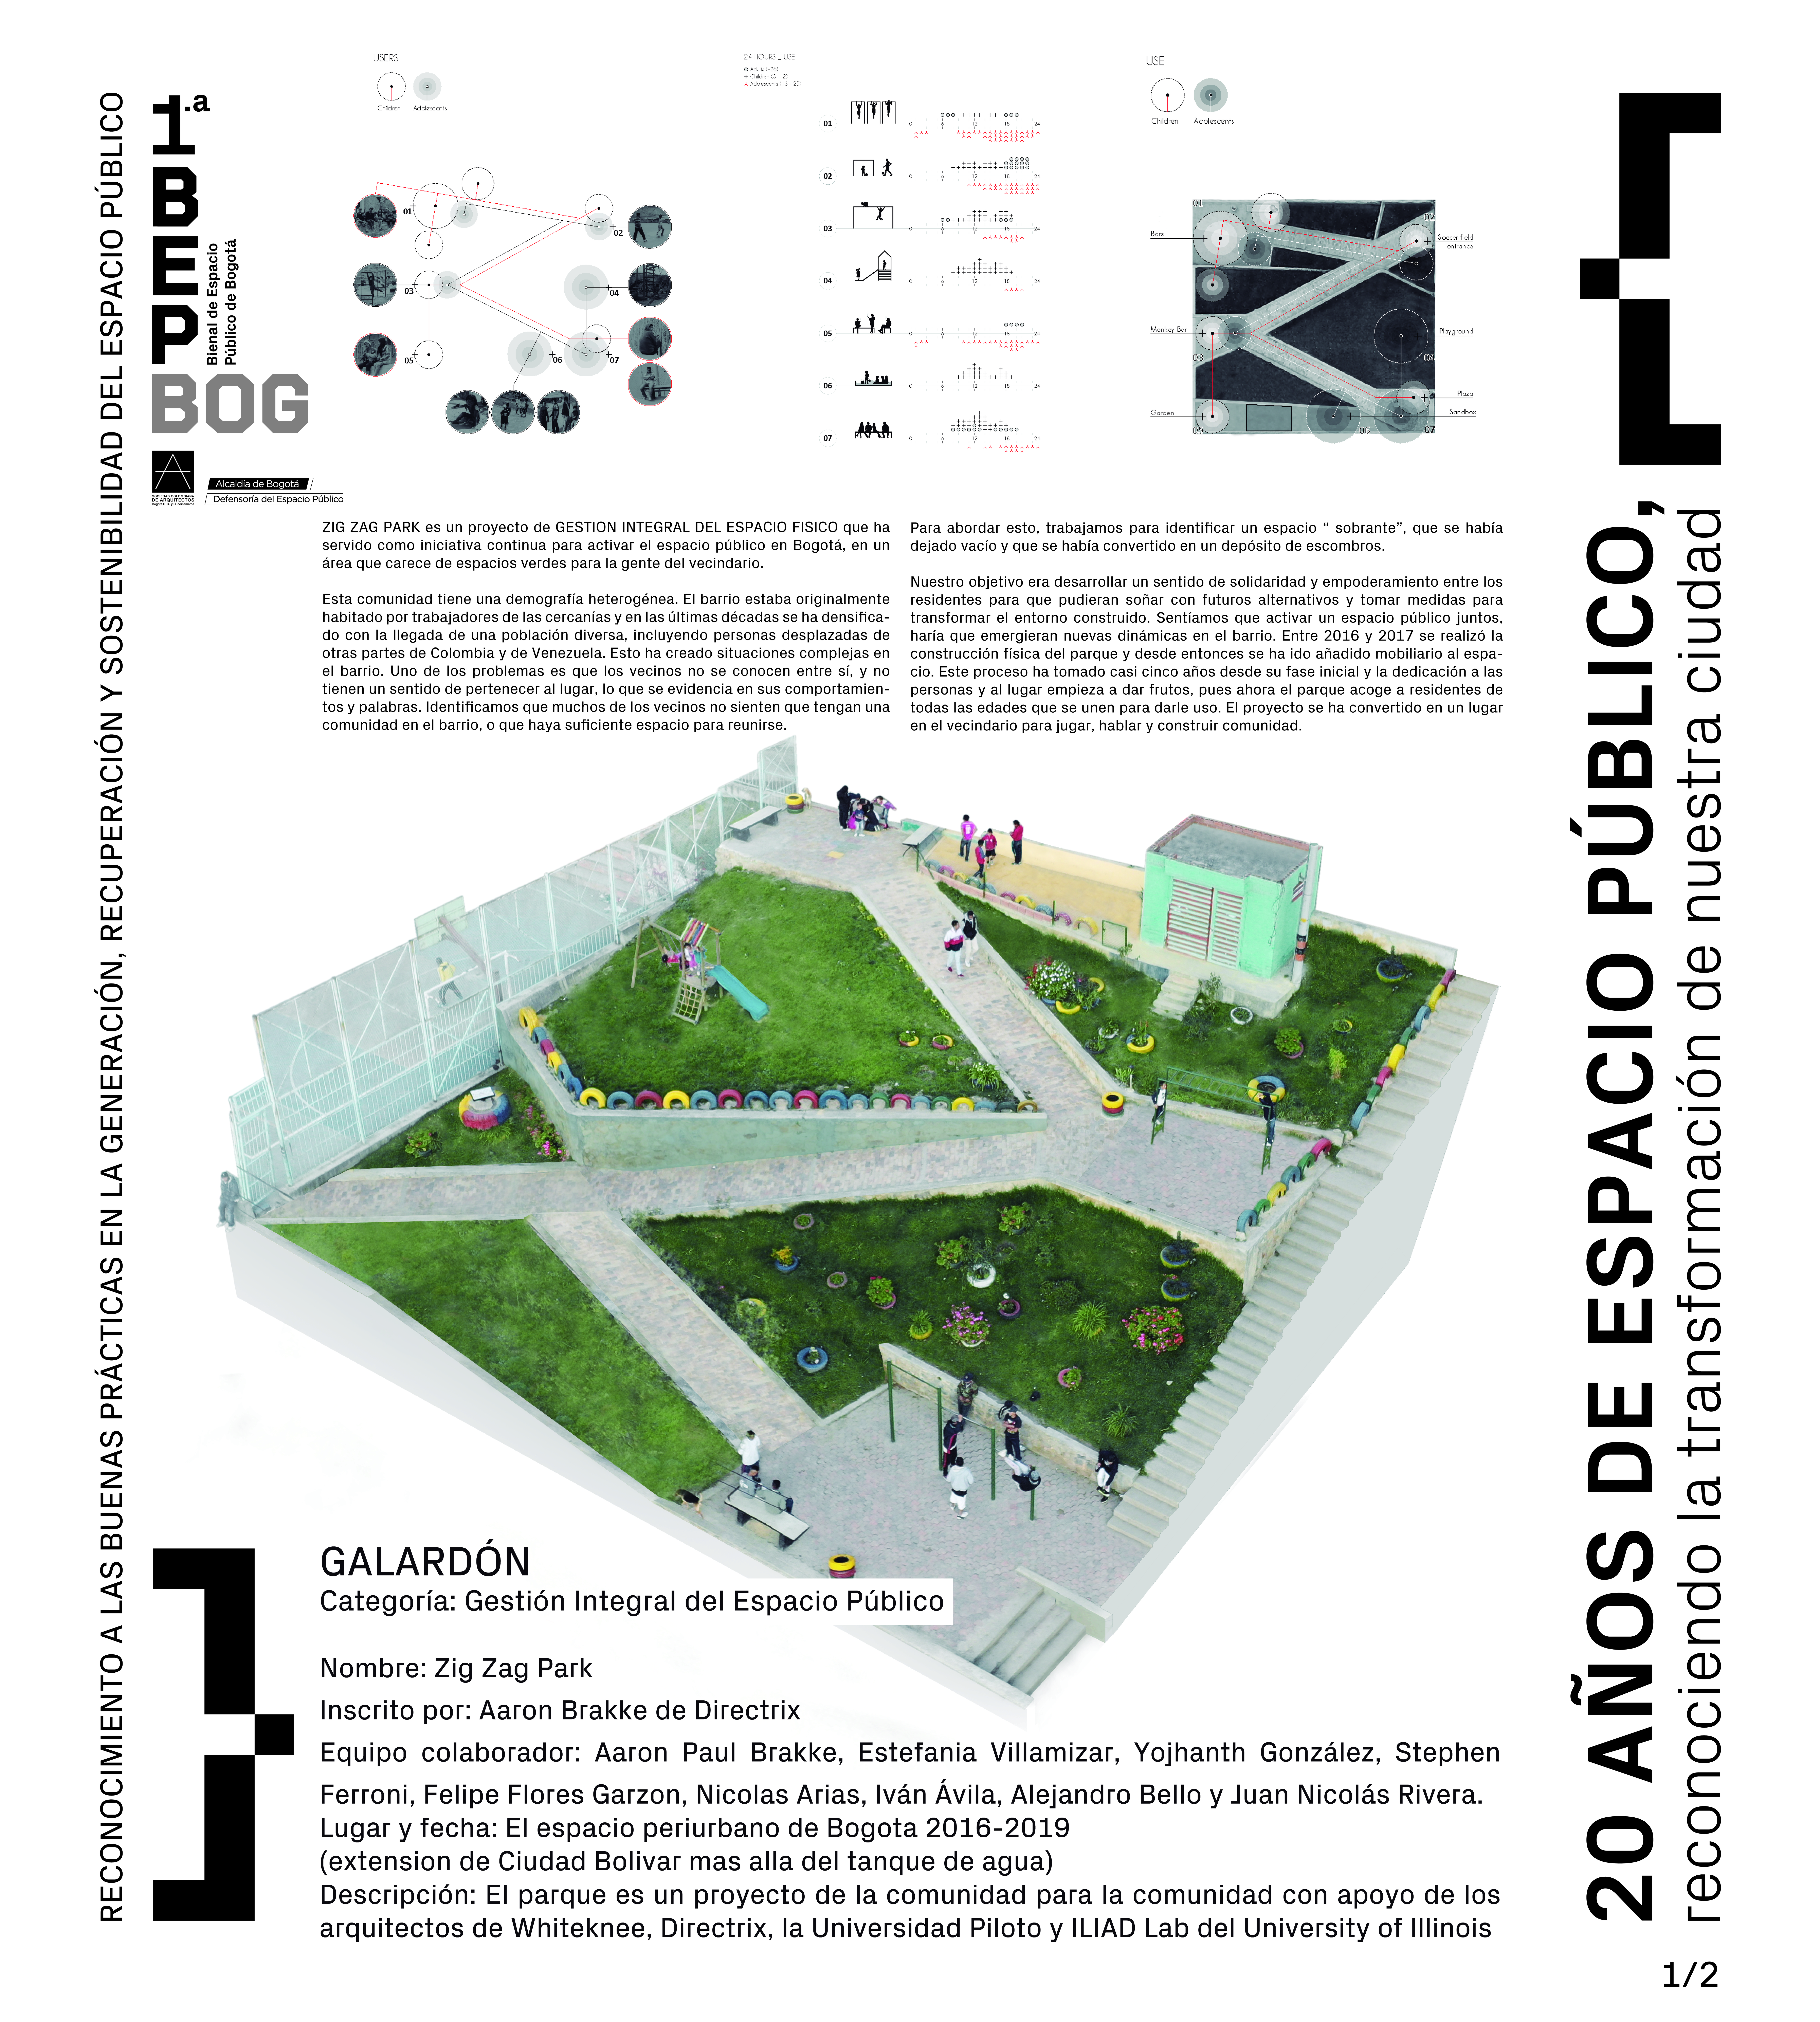 Zig Zag Park project poster for the first Public Space Biennial exhibit in Bogota.